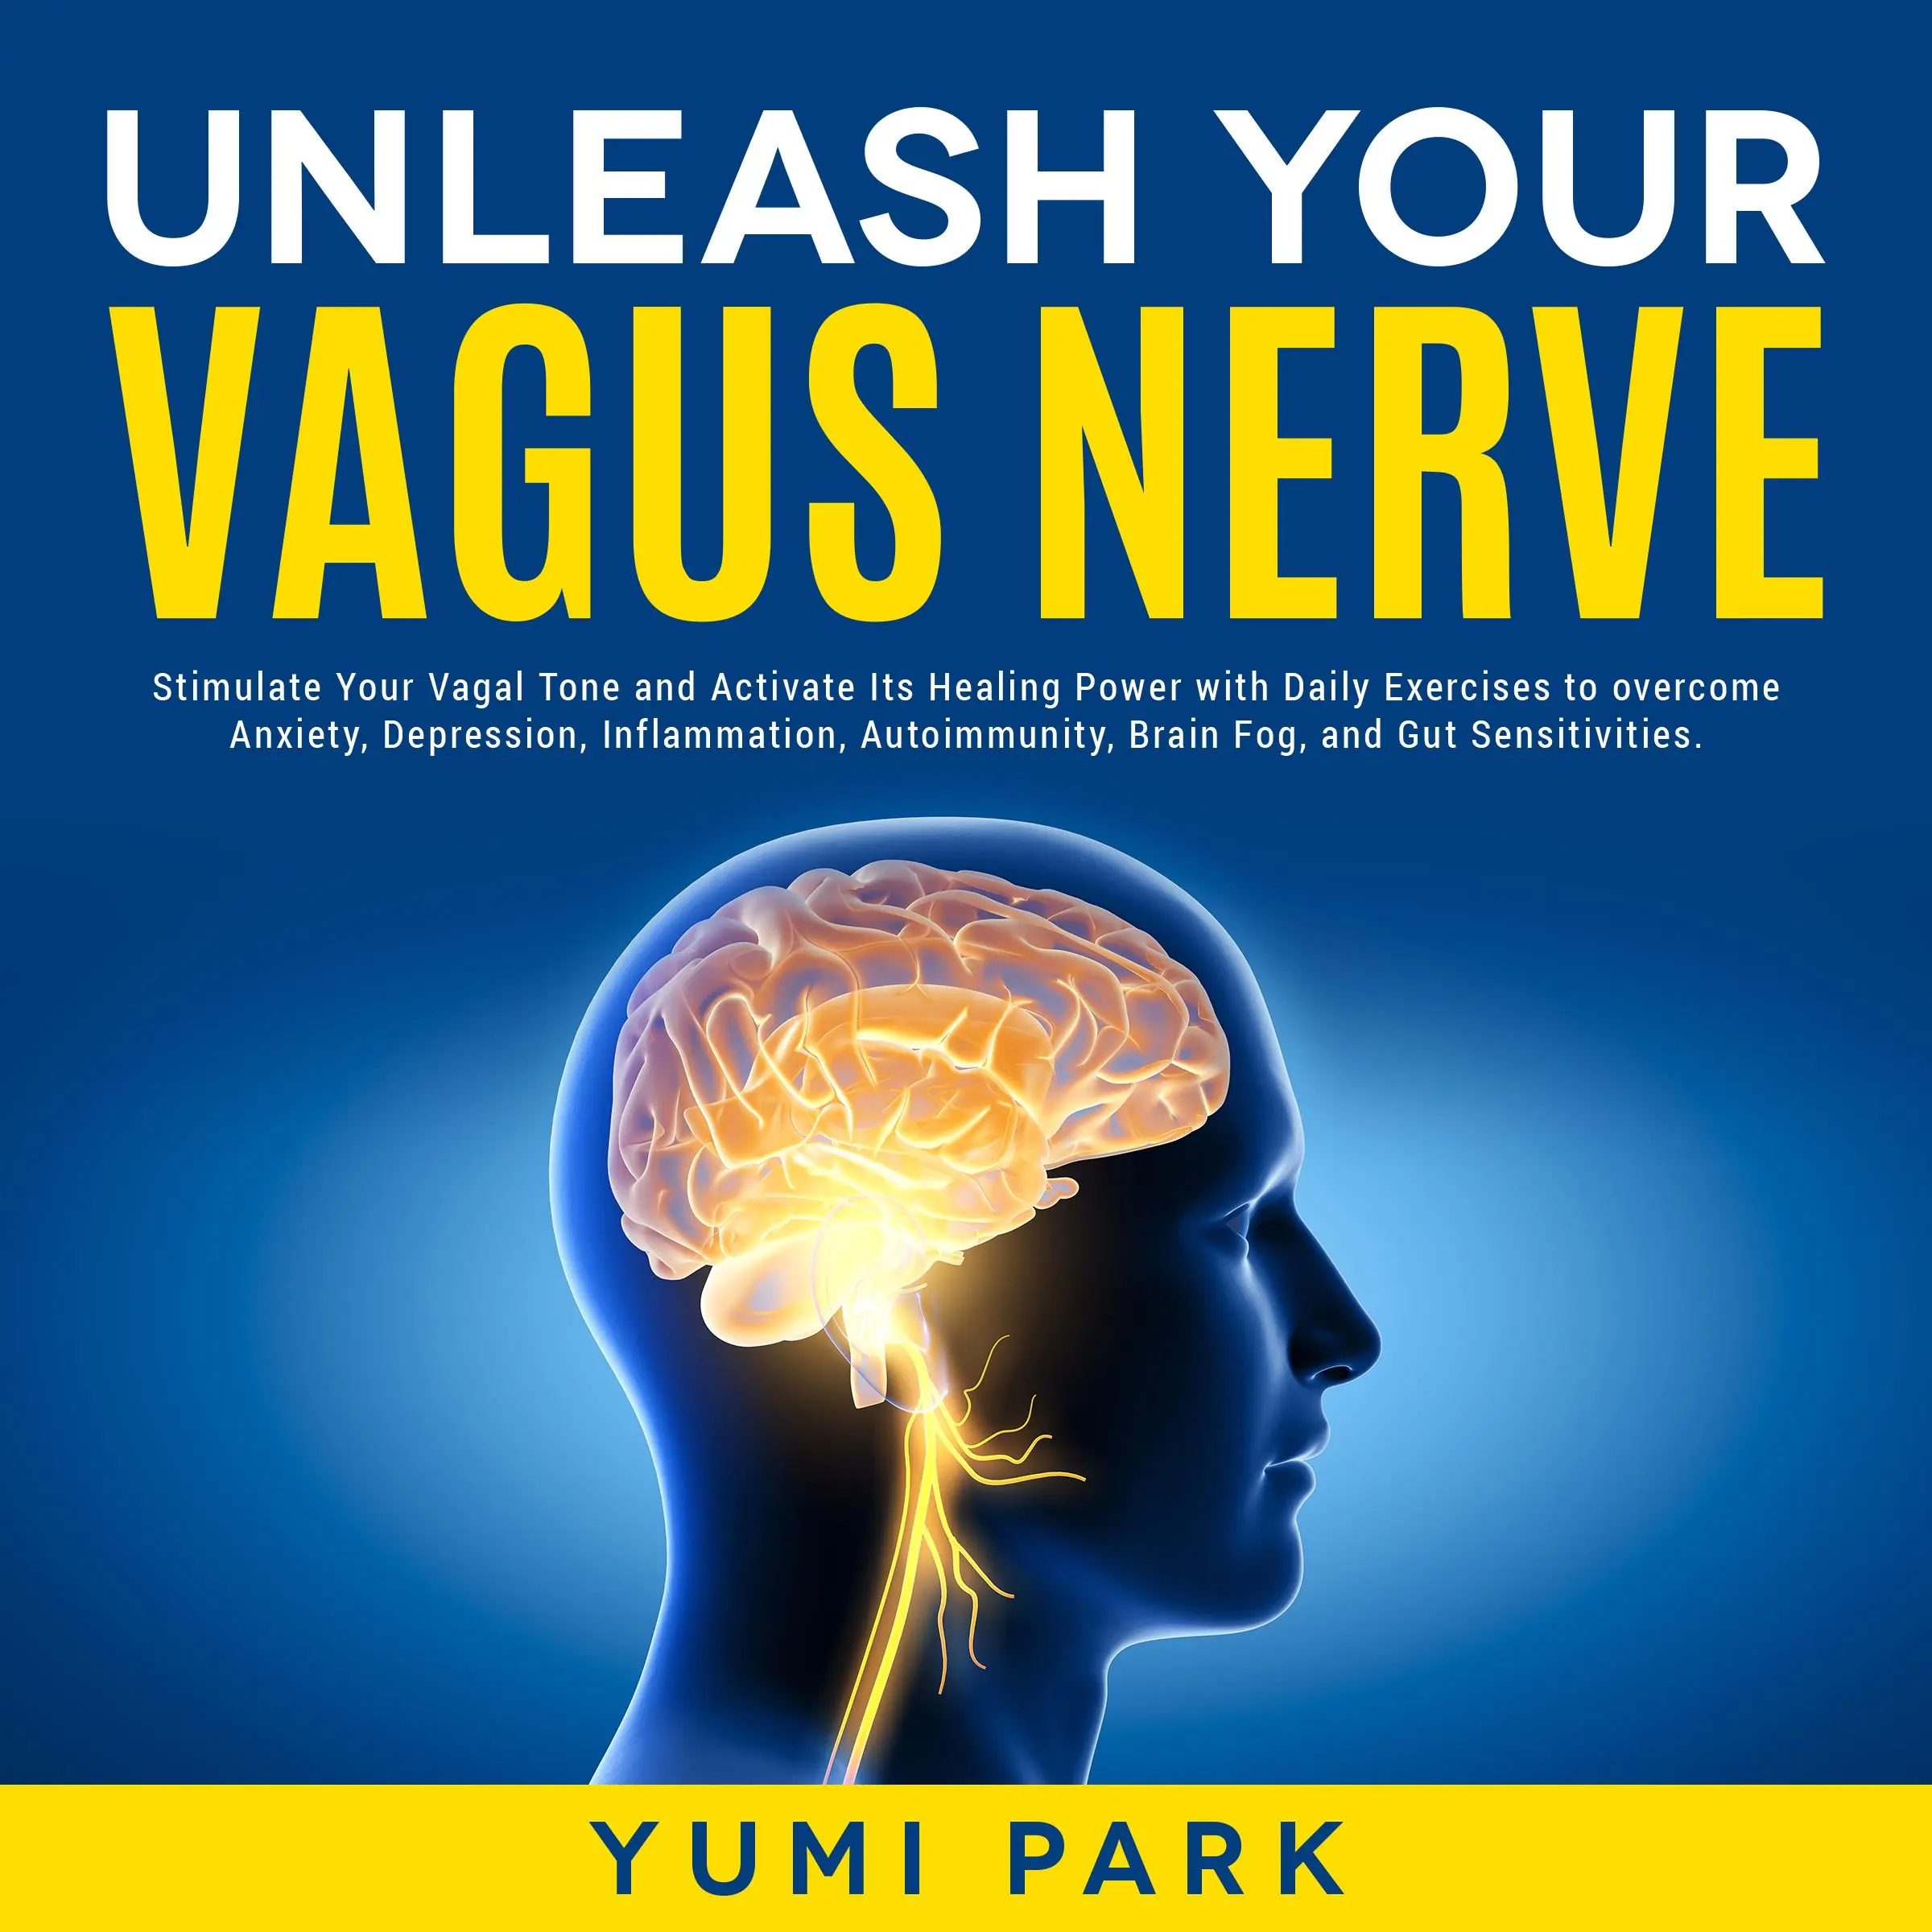 Unleash Your Vagus Nerve: Stimulate Your Vagal Tone and Activate Its Healing Power with Daily Exercises to overcome Anxiety, Depression, Inflammation, Autoimmunity, Brain Fog, and Gut Sensitivities. Audiobook by Yumi Park